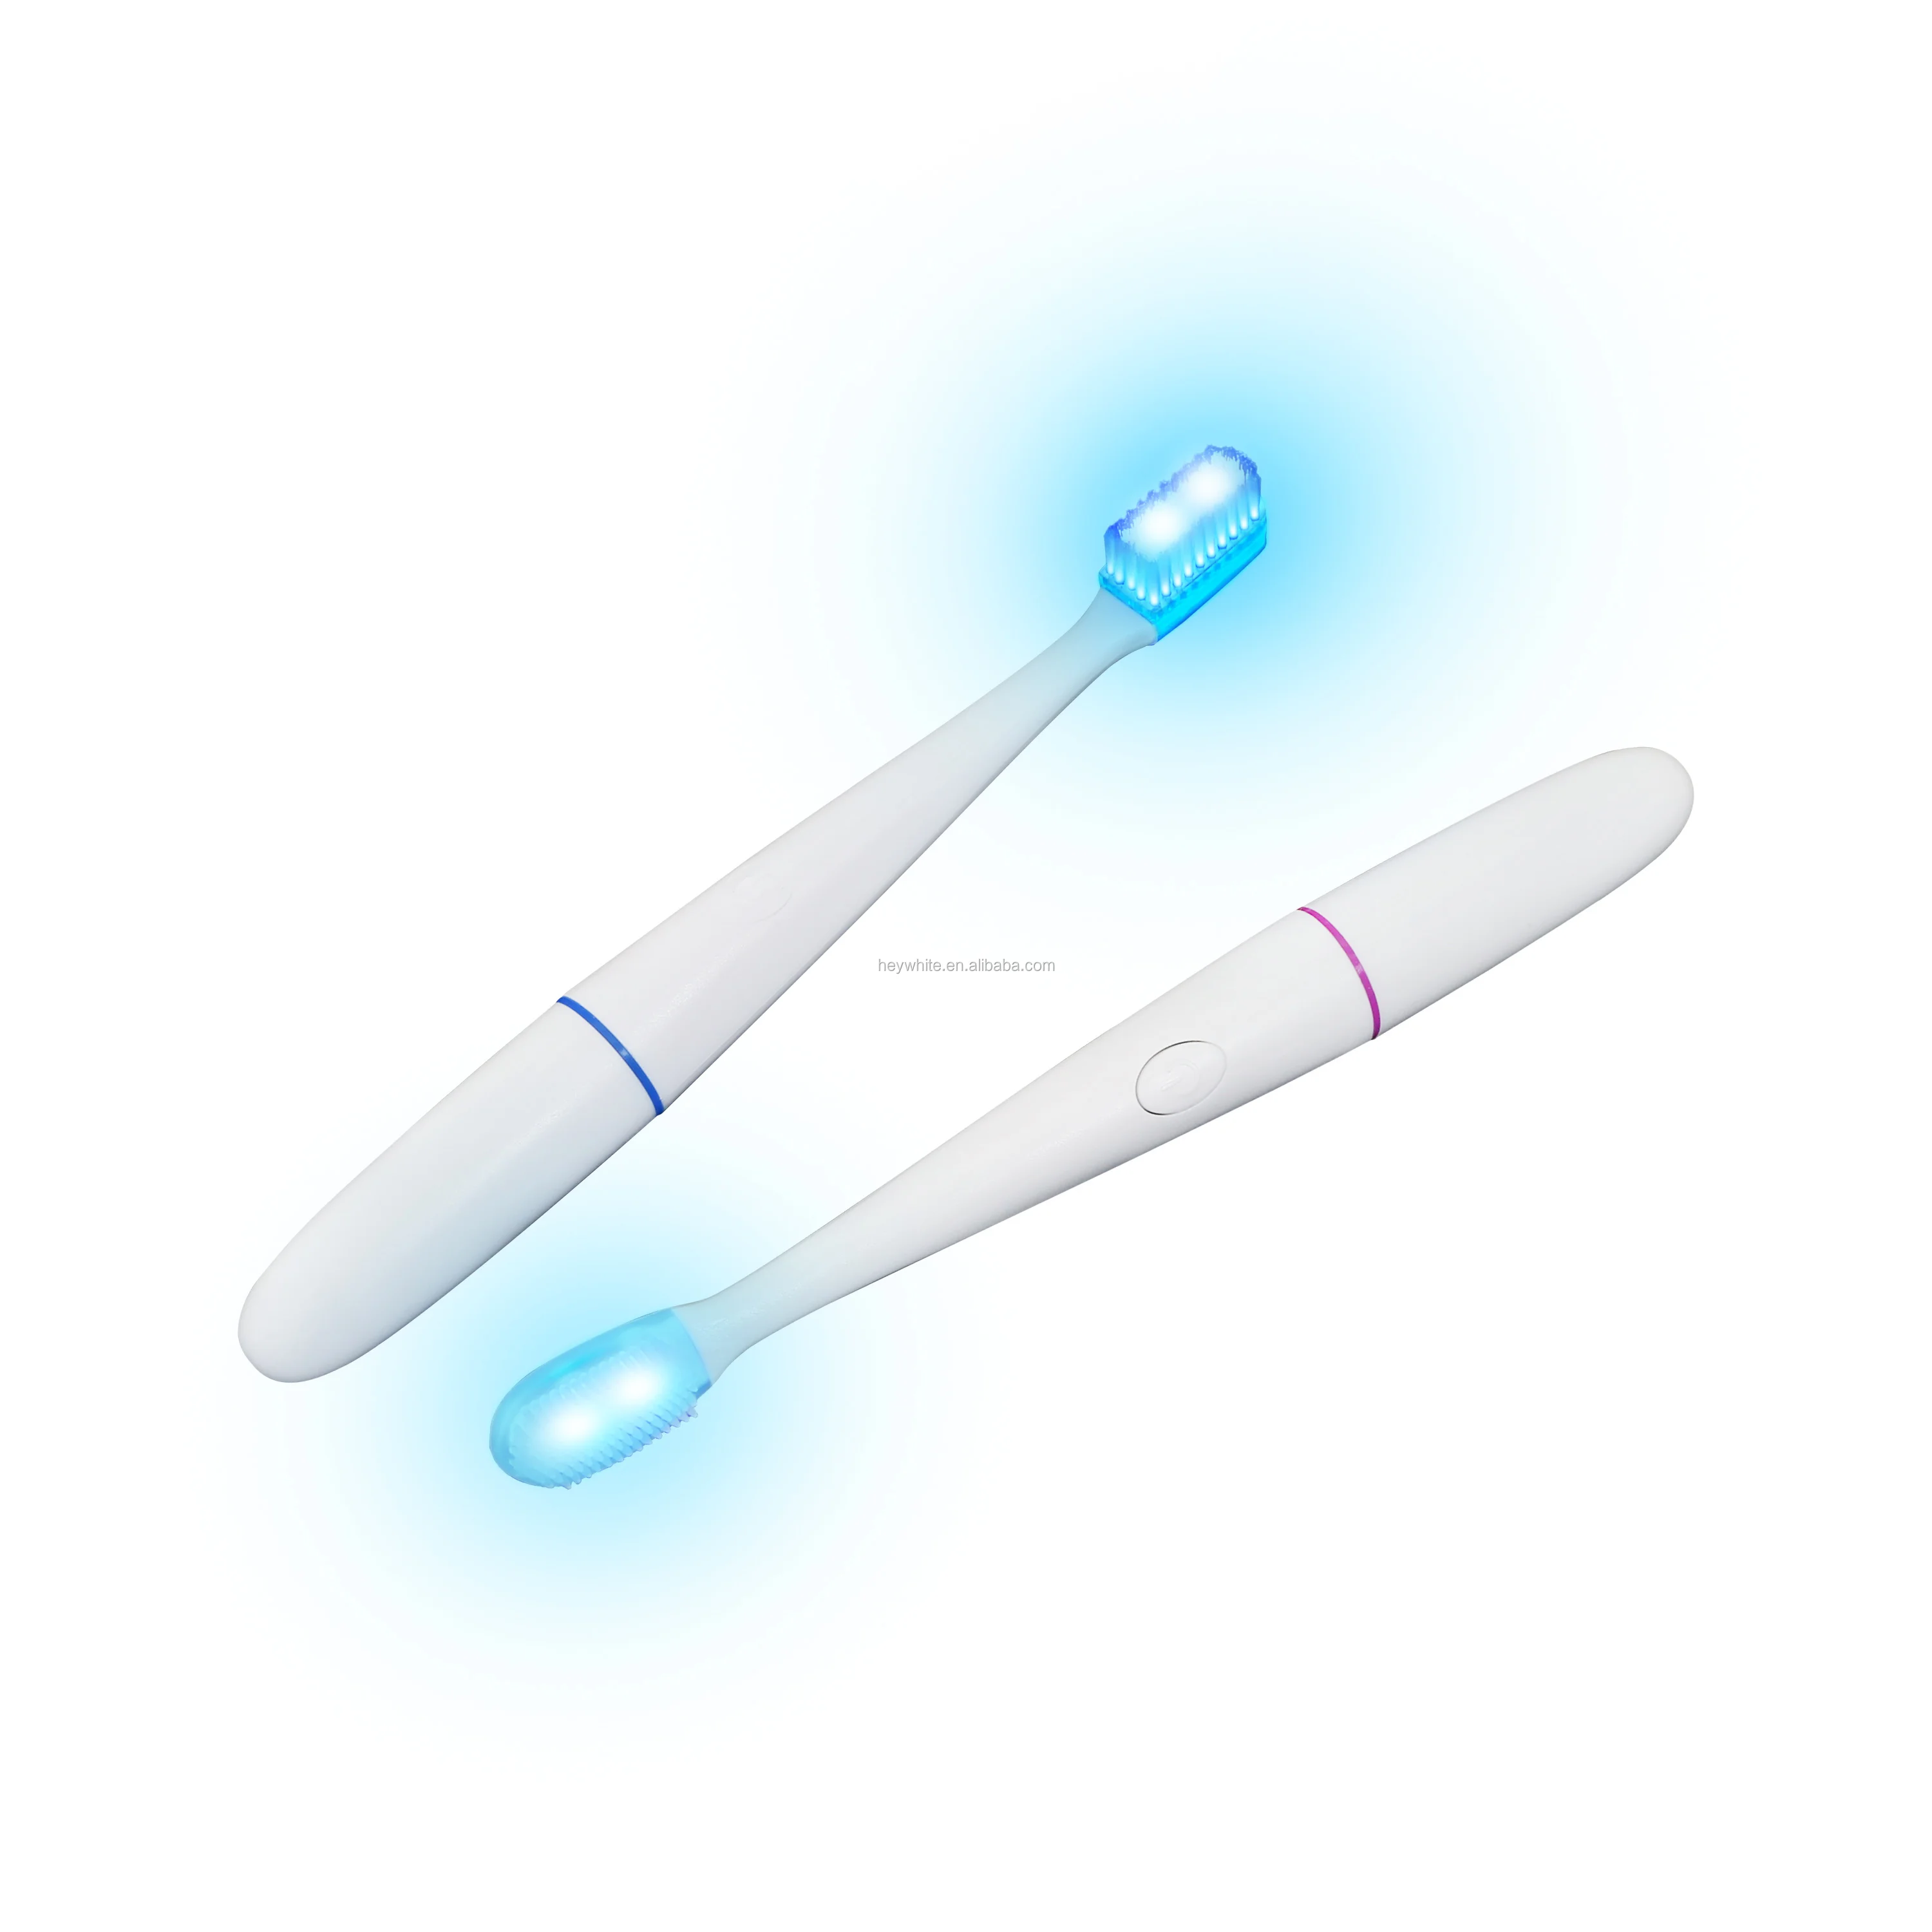 2020 hot sale teeth whitening toothbrush electric vibration toothbrush with 2 led blue light